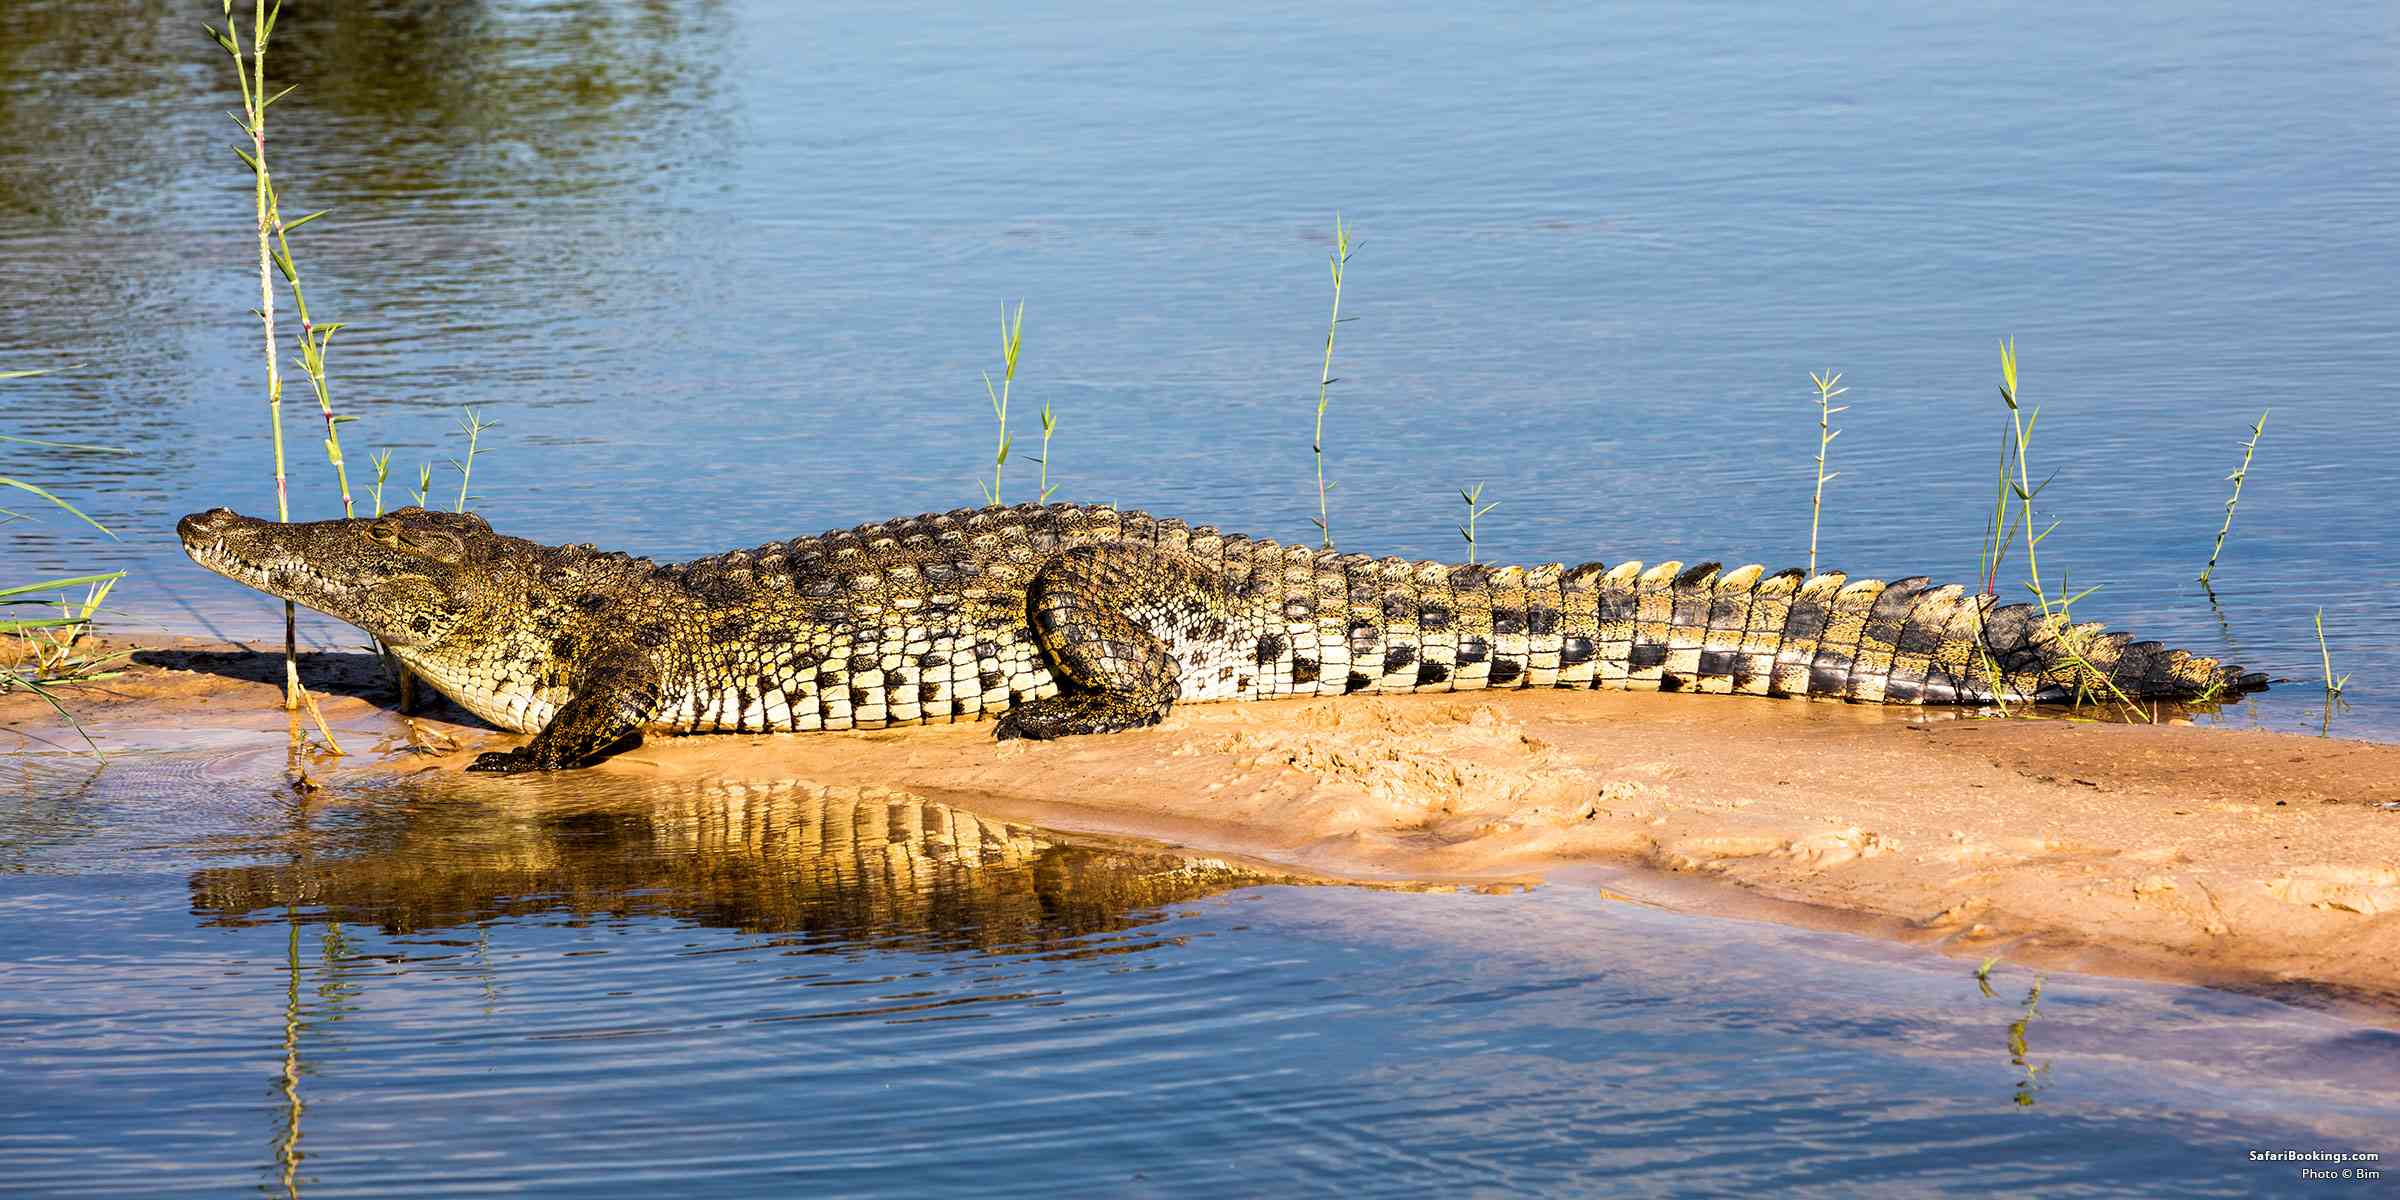 What Do You Call a Group of Crocodiles   : Fascinating Facts